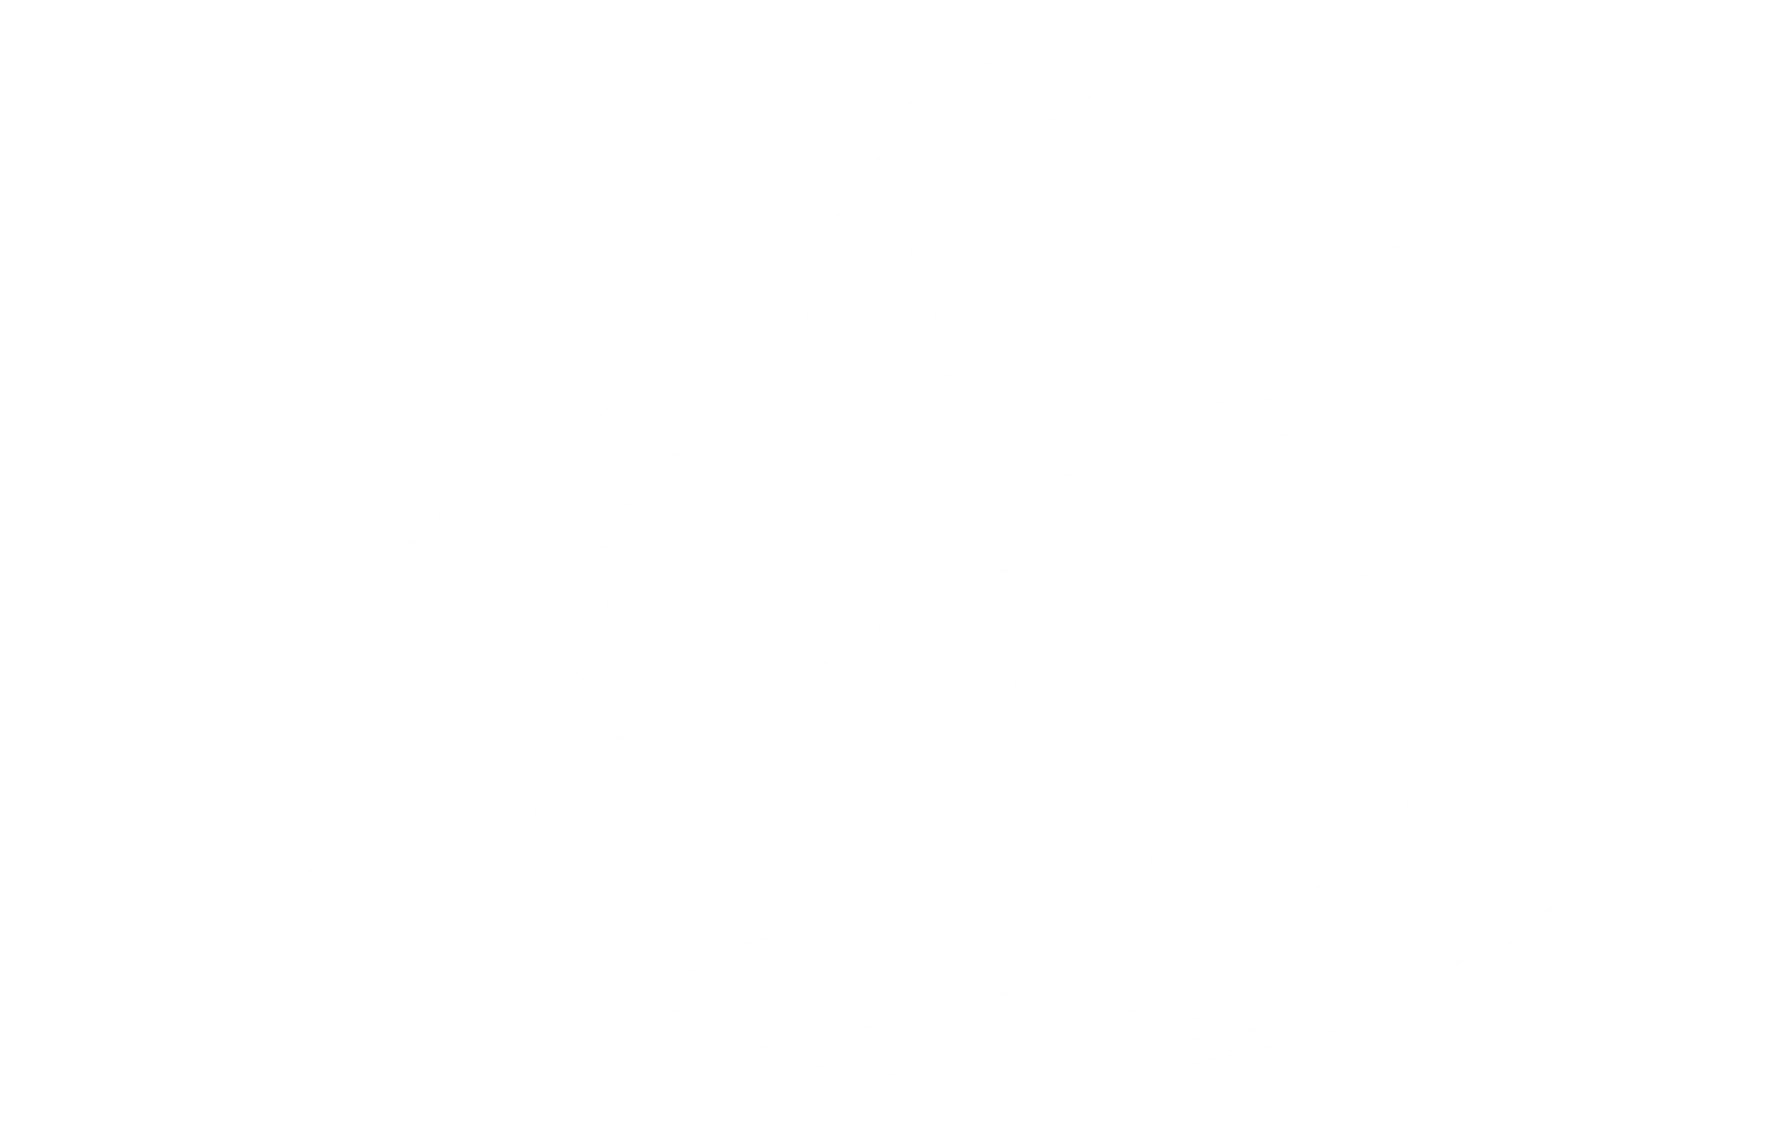 Mata Cooks logo, with the name written in letters inside a dish.